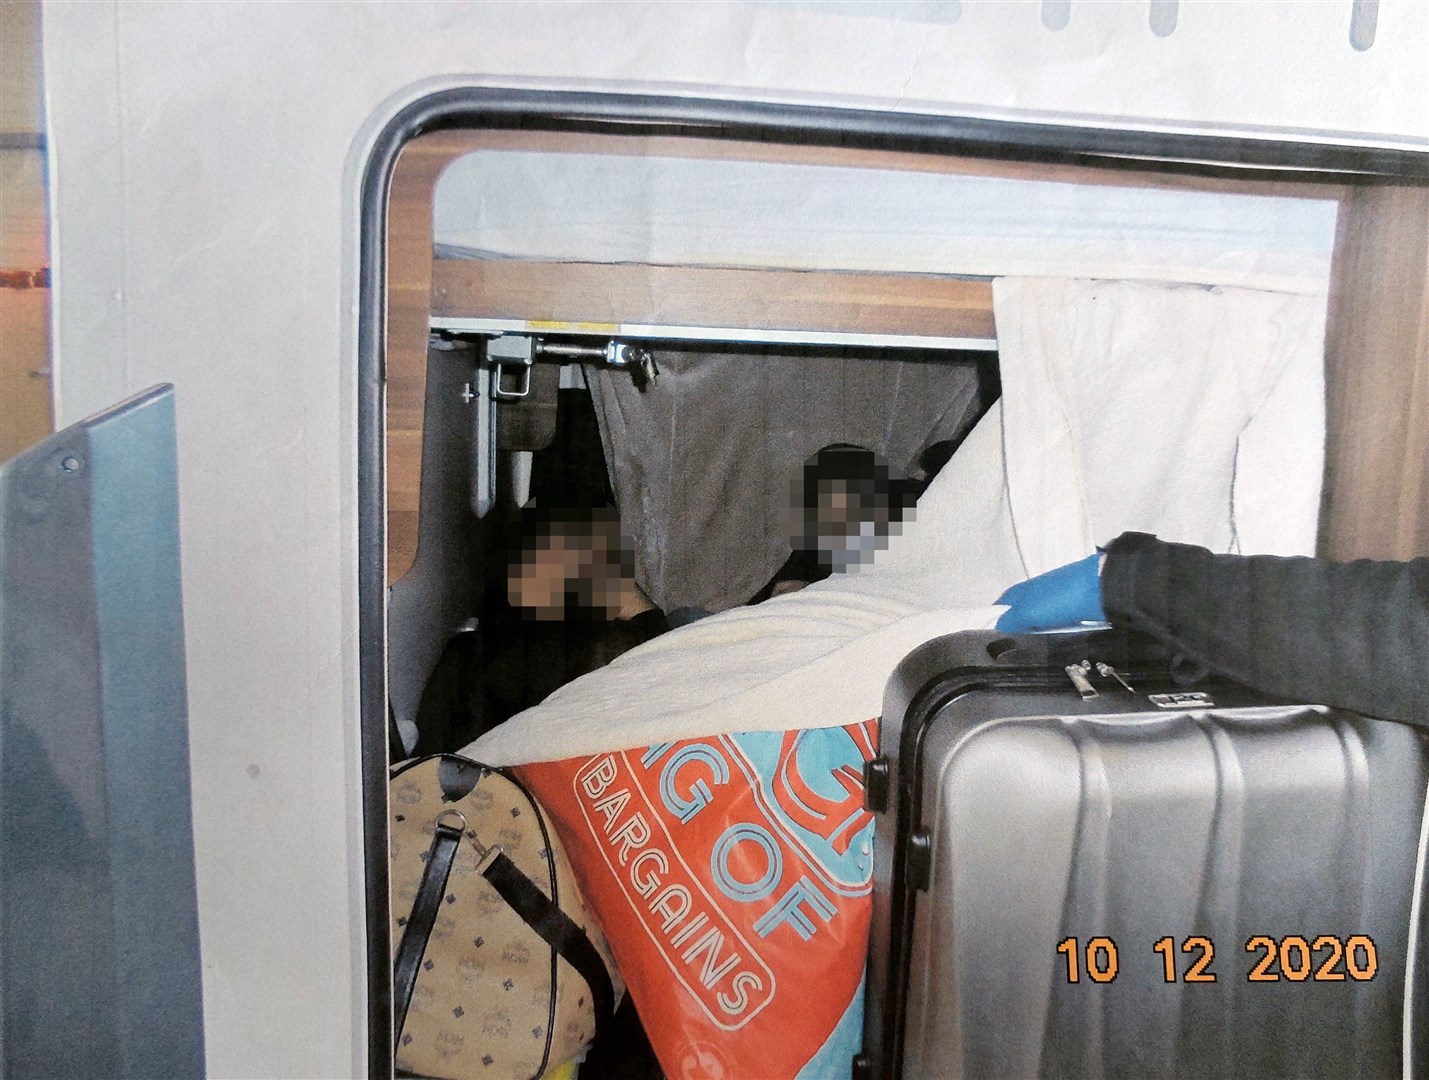 The migrants were found hiding in a motorhome on the French side of the Channel Tunnel (Home Office/PA)